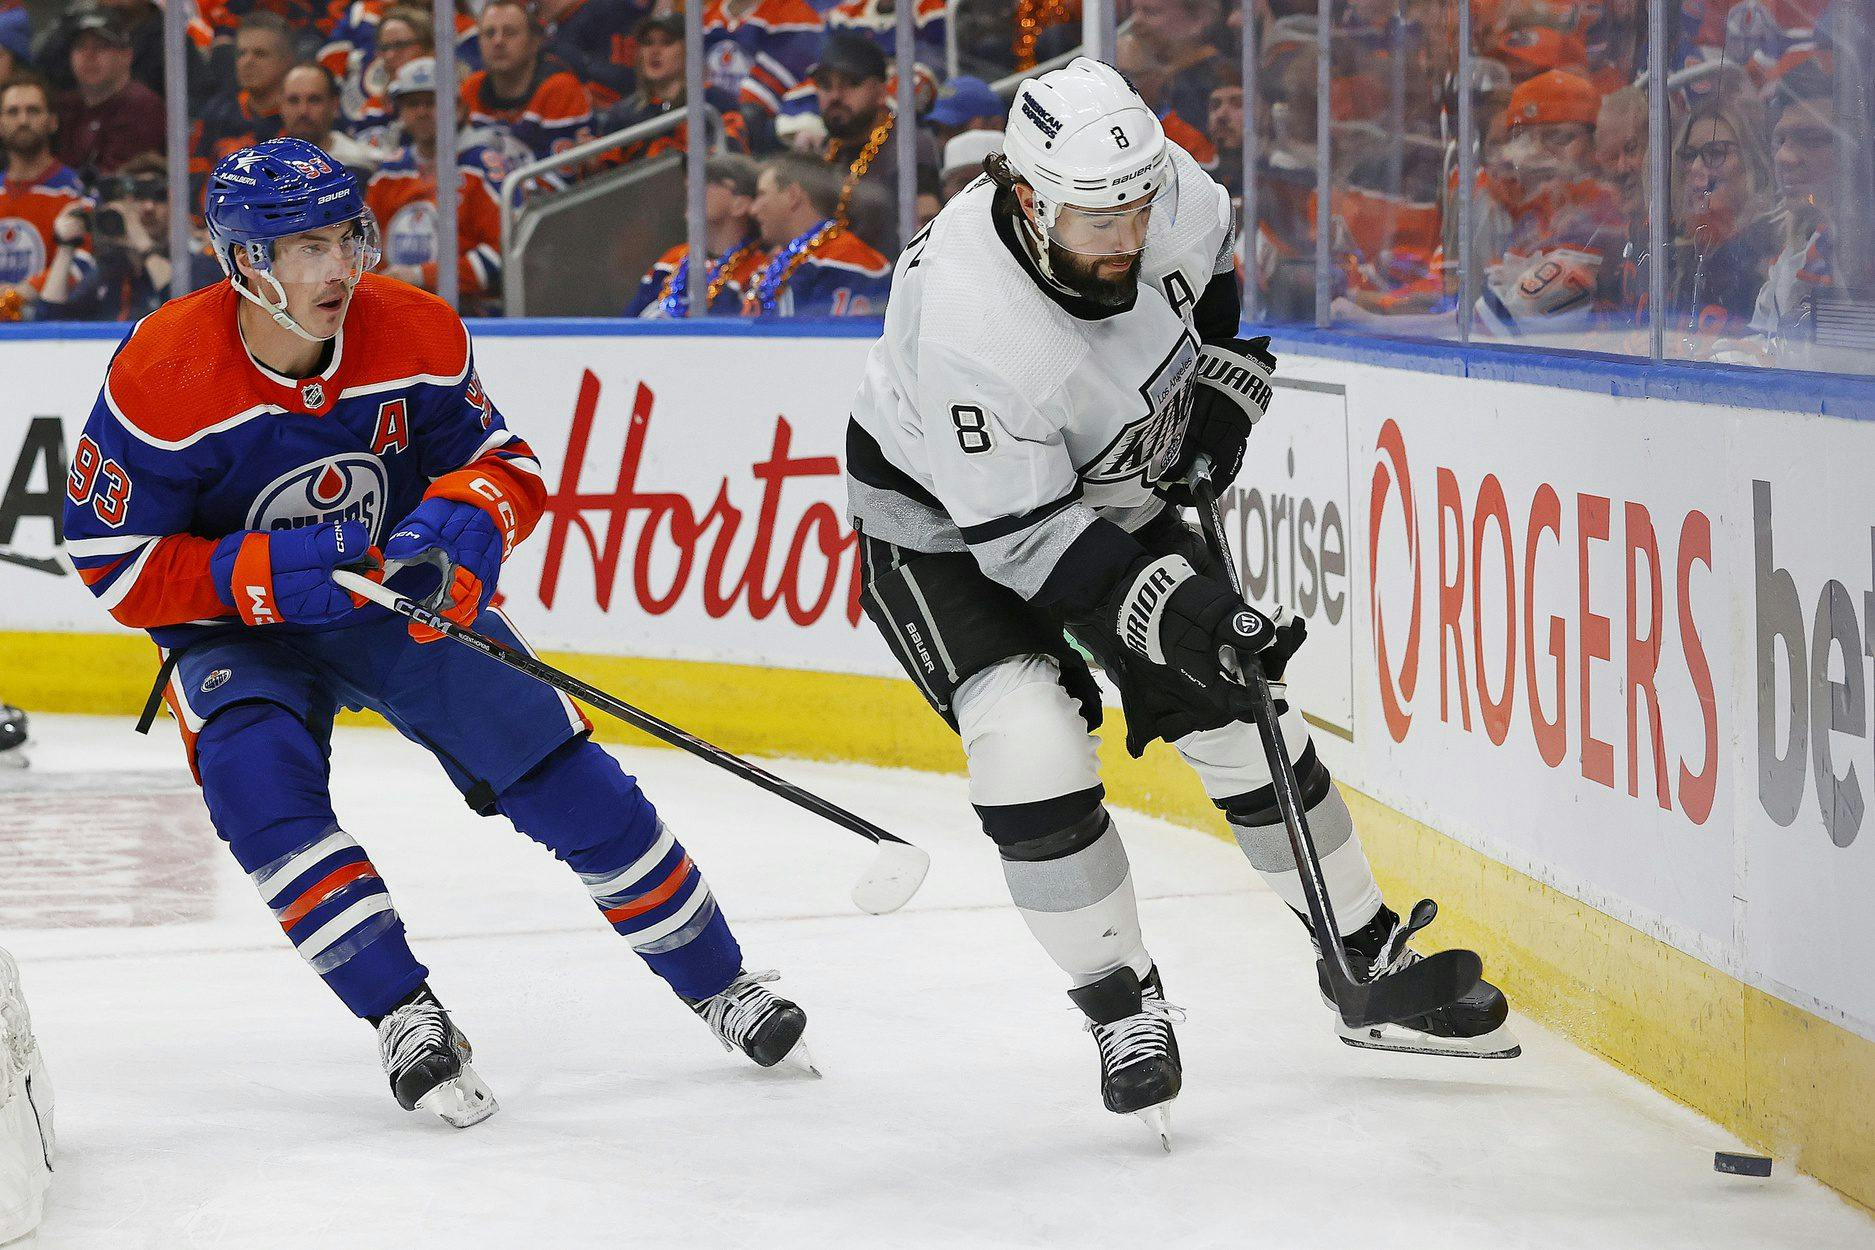 The Los Angeles Kings can’t afford to go down 0-2 to Edmonton Oilers